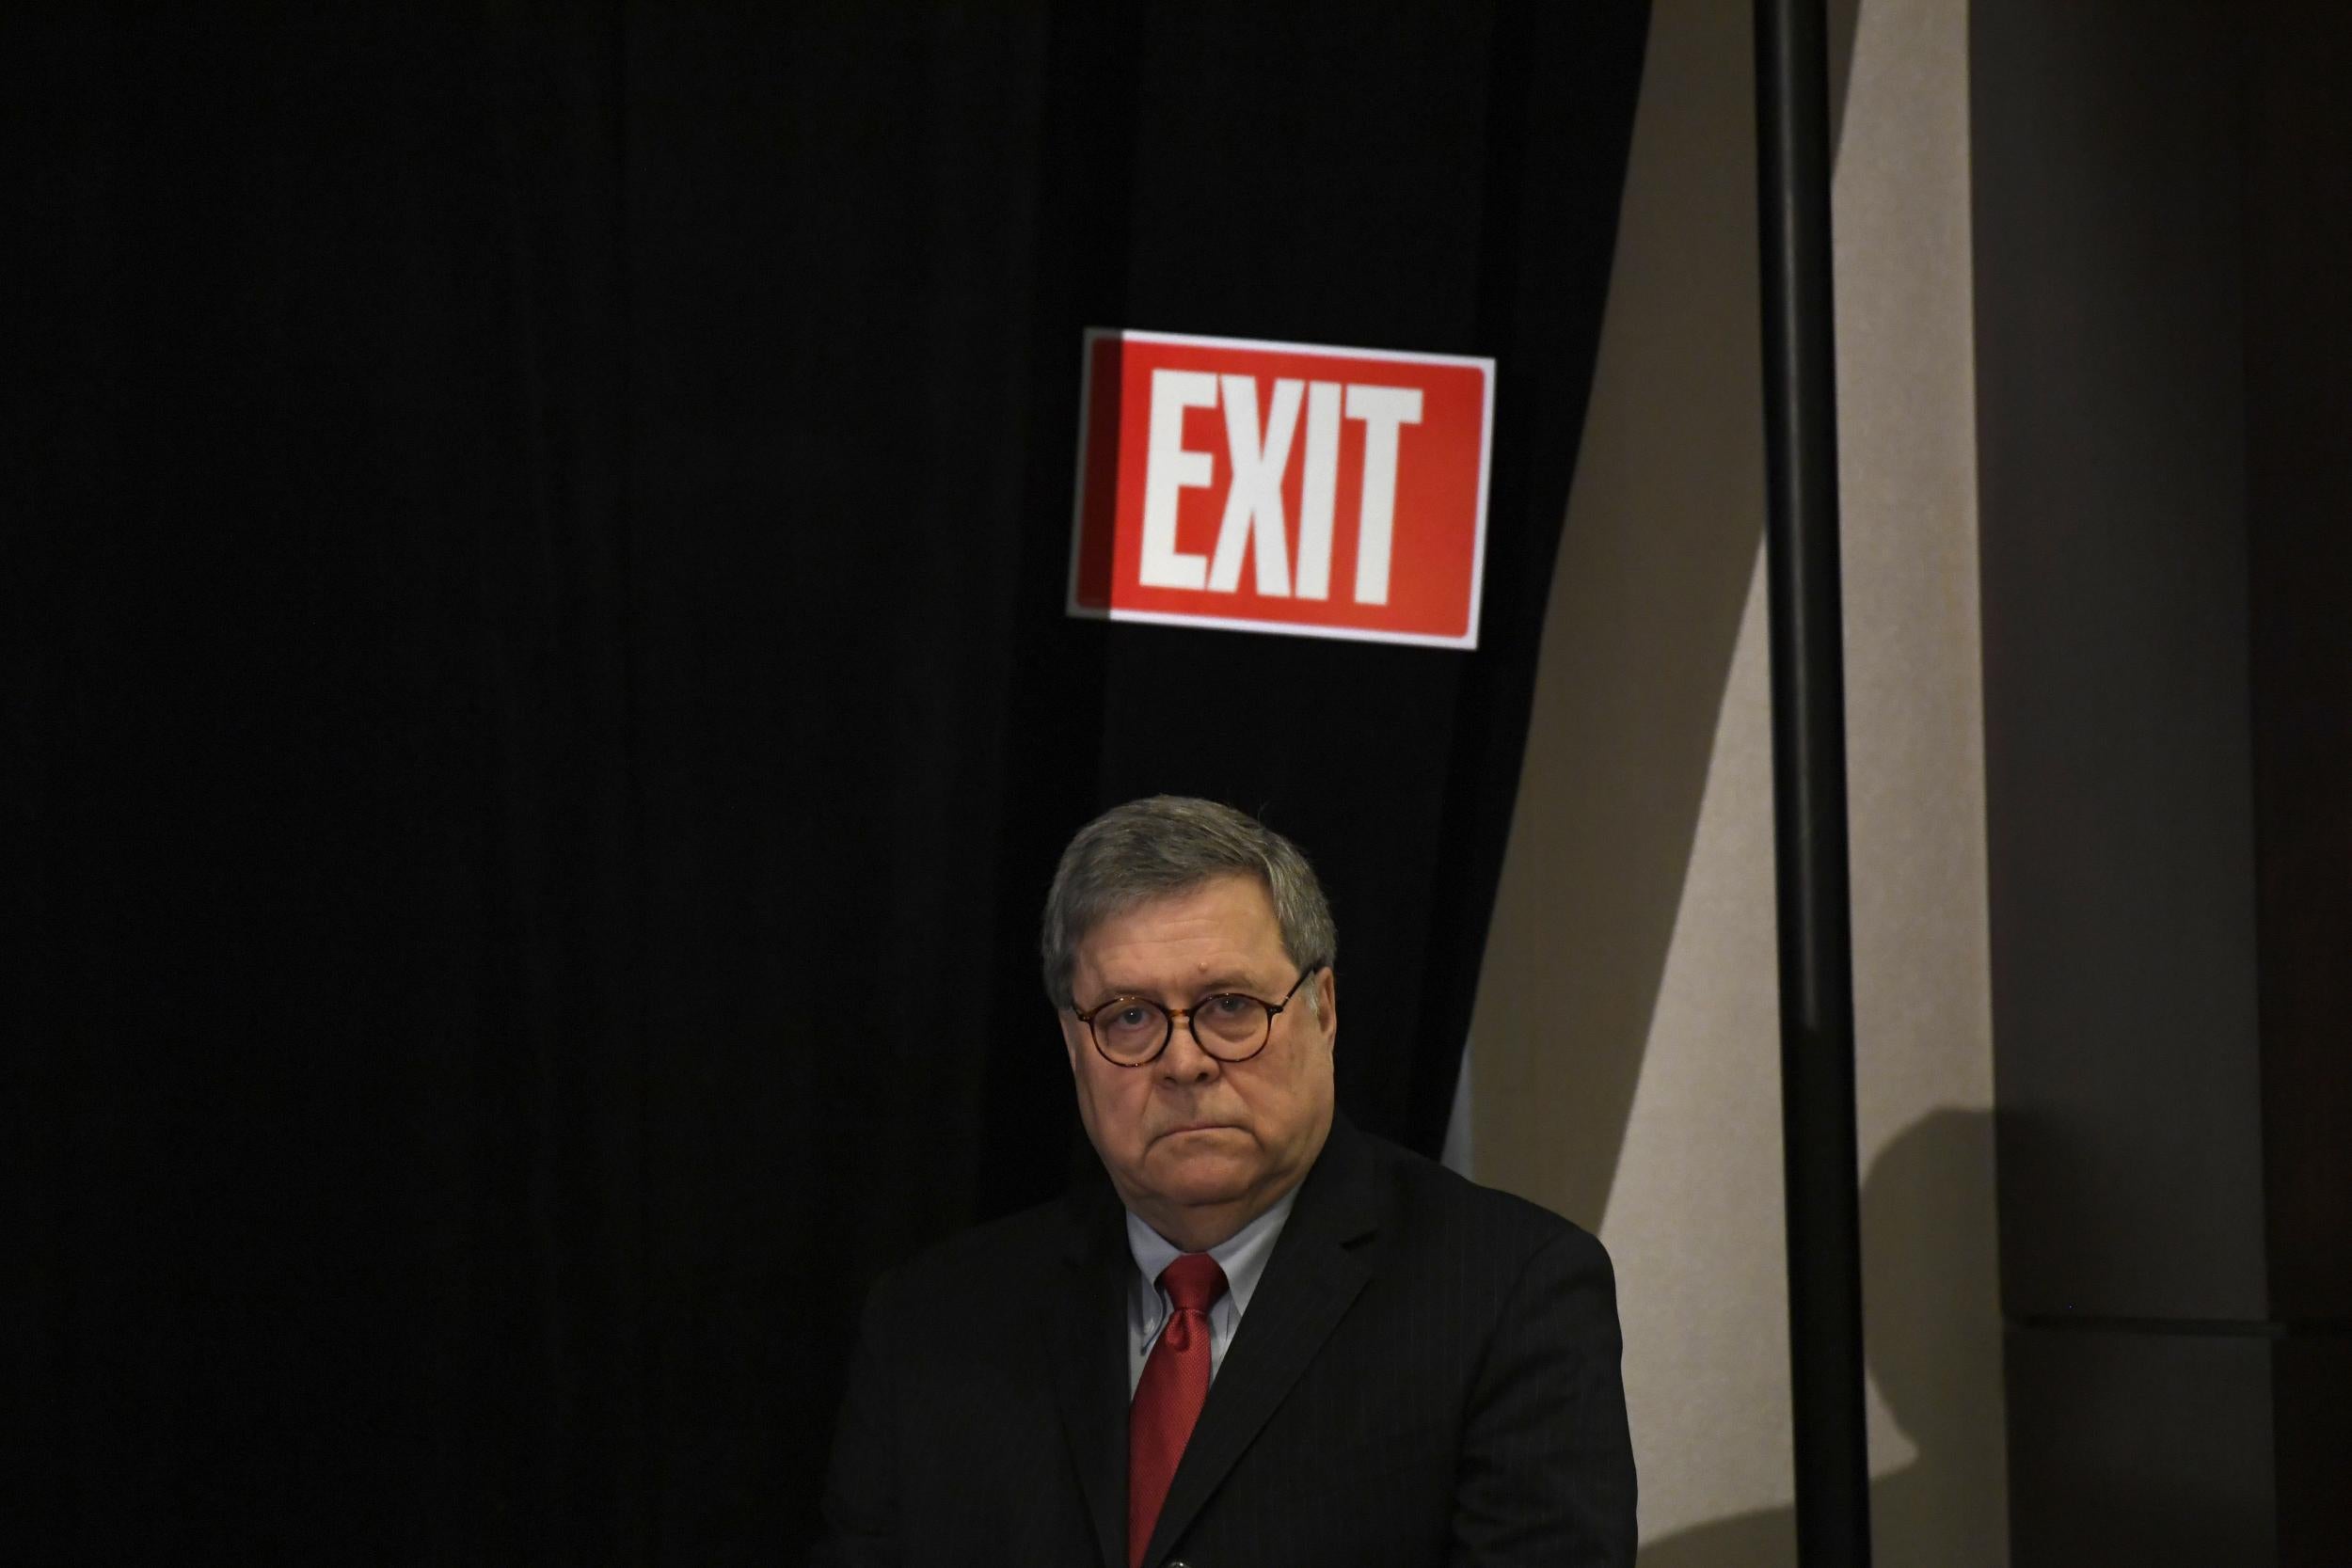 William Barr does not seem to be going anywhere - at least not yet